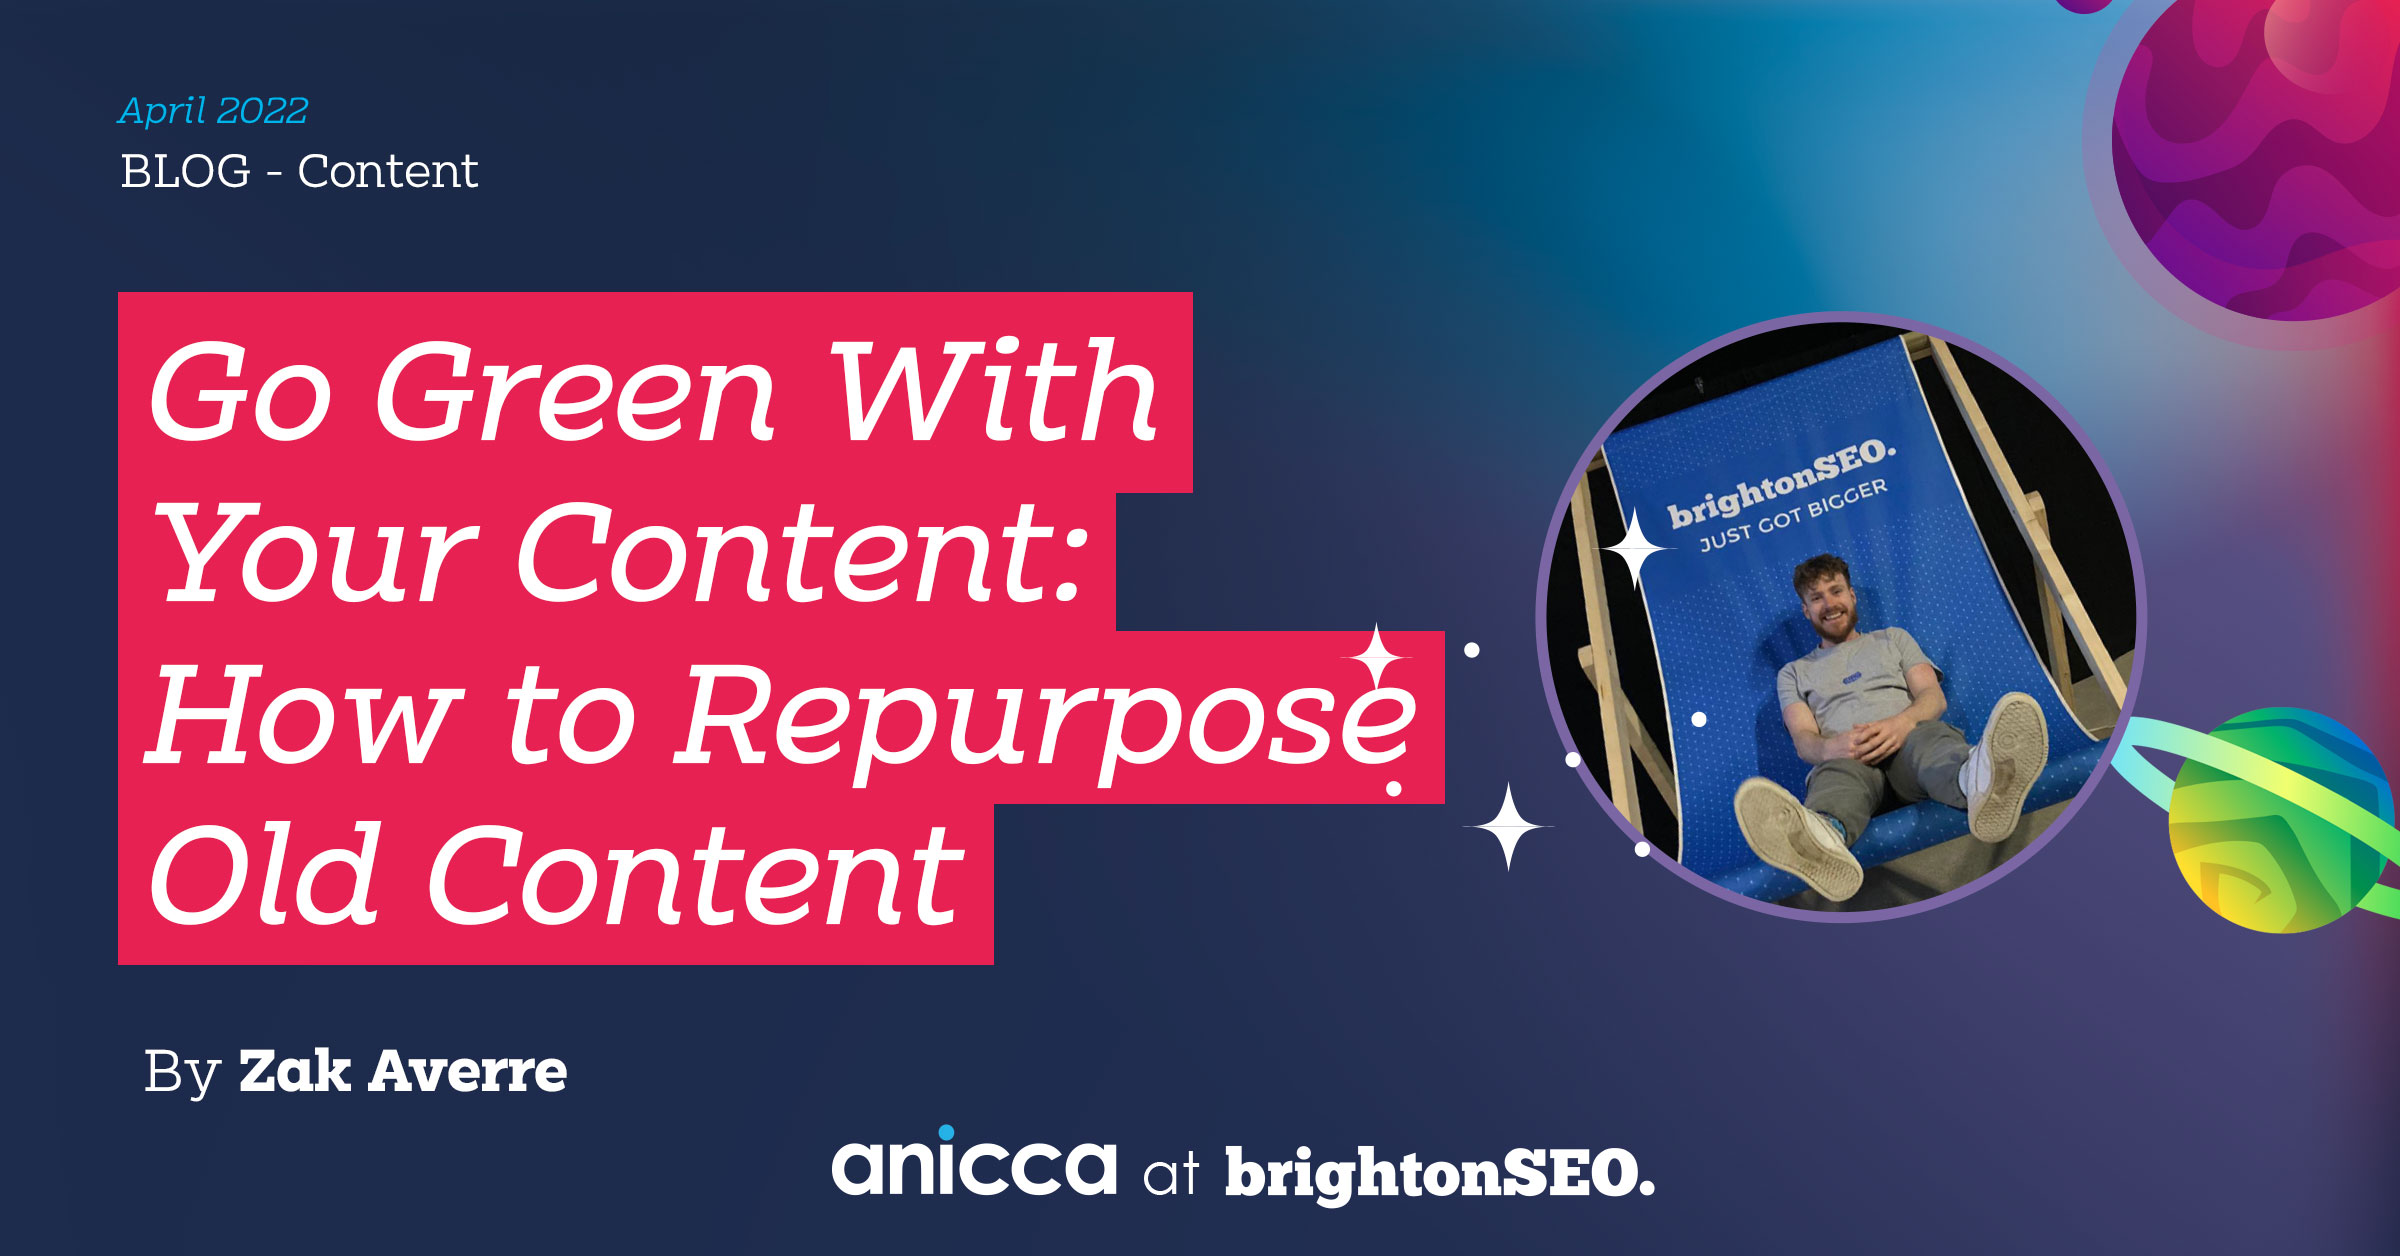 How to repurpose old content